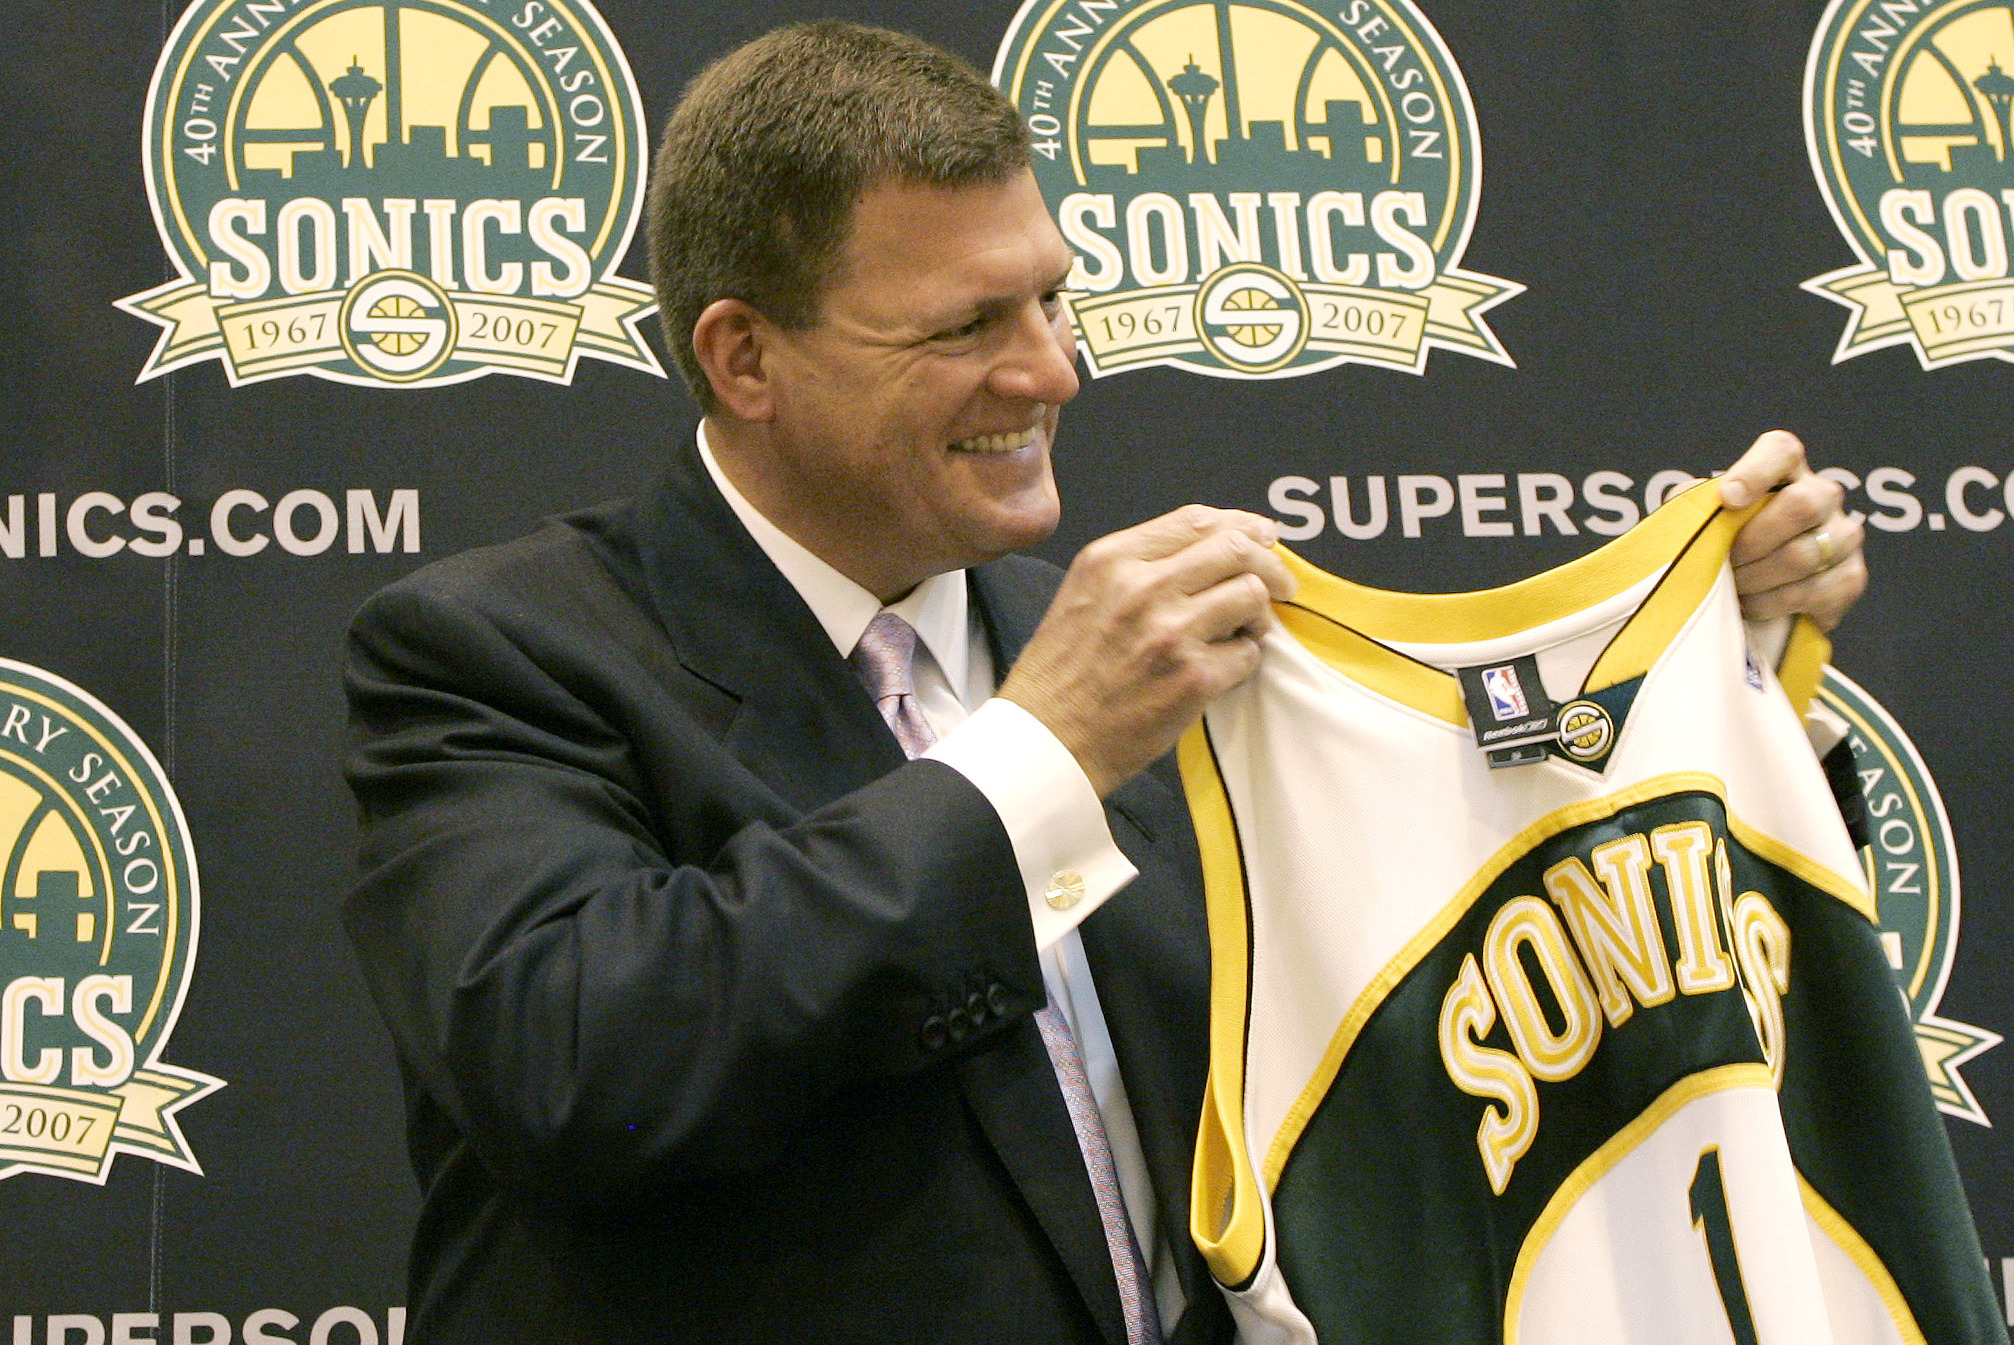 Durant gives suport ​to return the Sonics to Seattle - Basketball Network -  Your daily dose of basketball